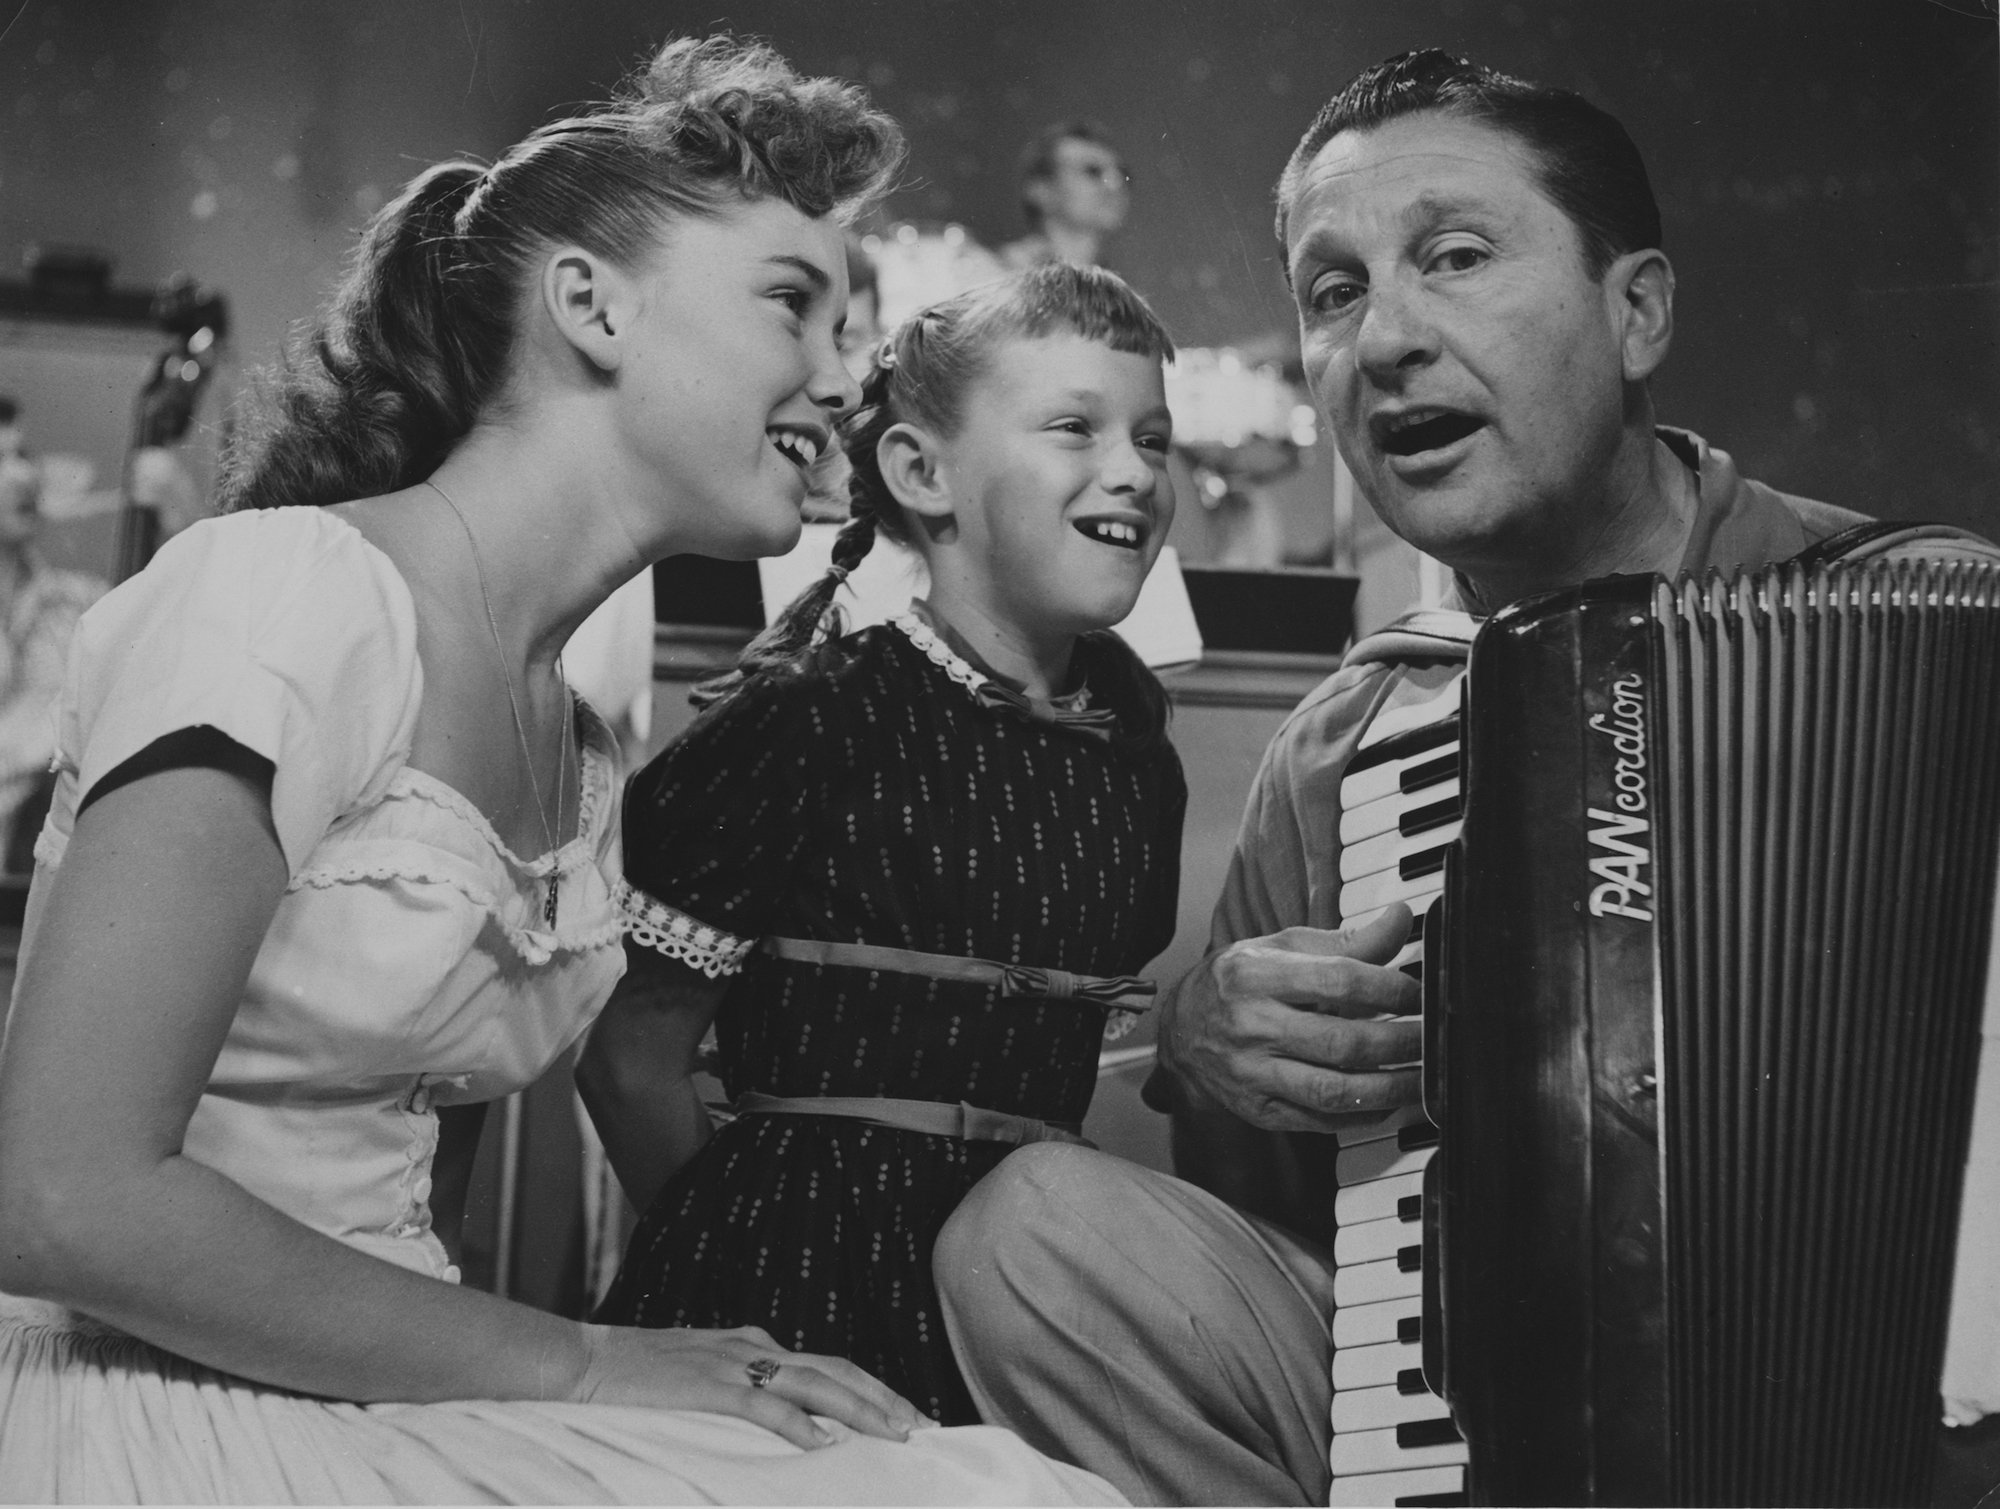 (L-R) Dianne Lennon, Janet Lennon, and Lawrence Welk playing an accordion, in black and white